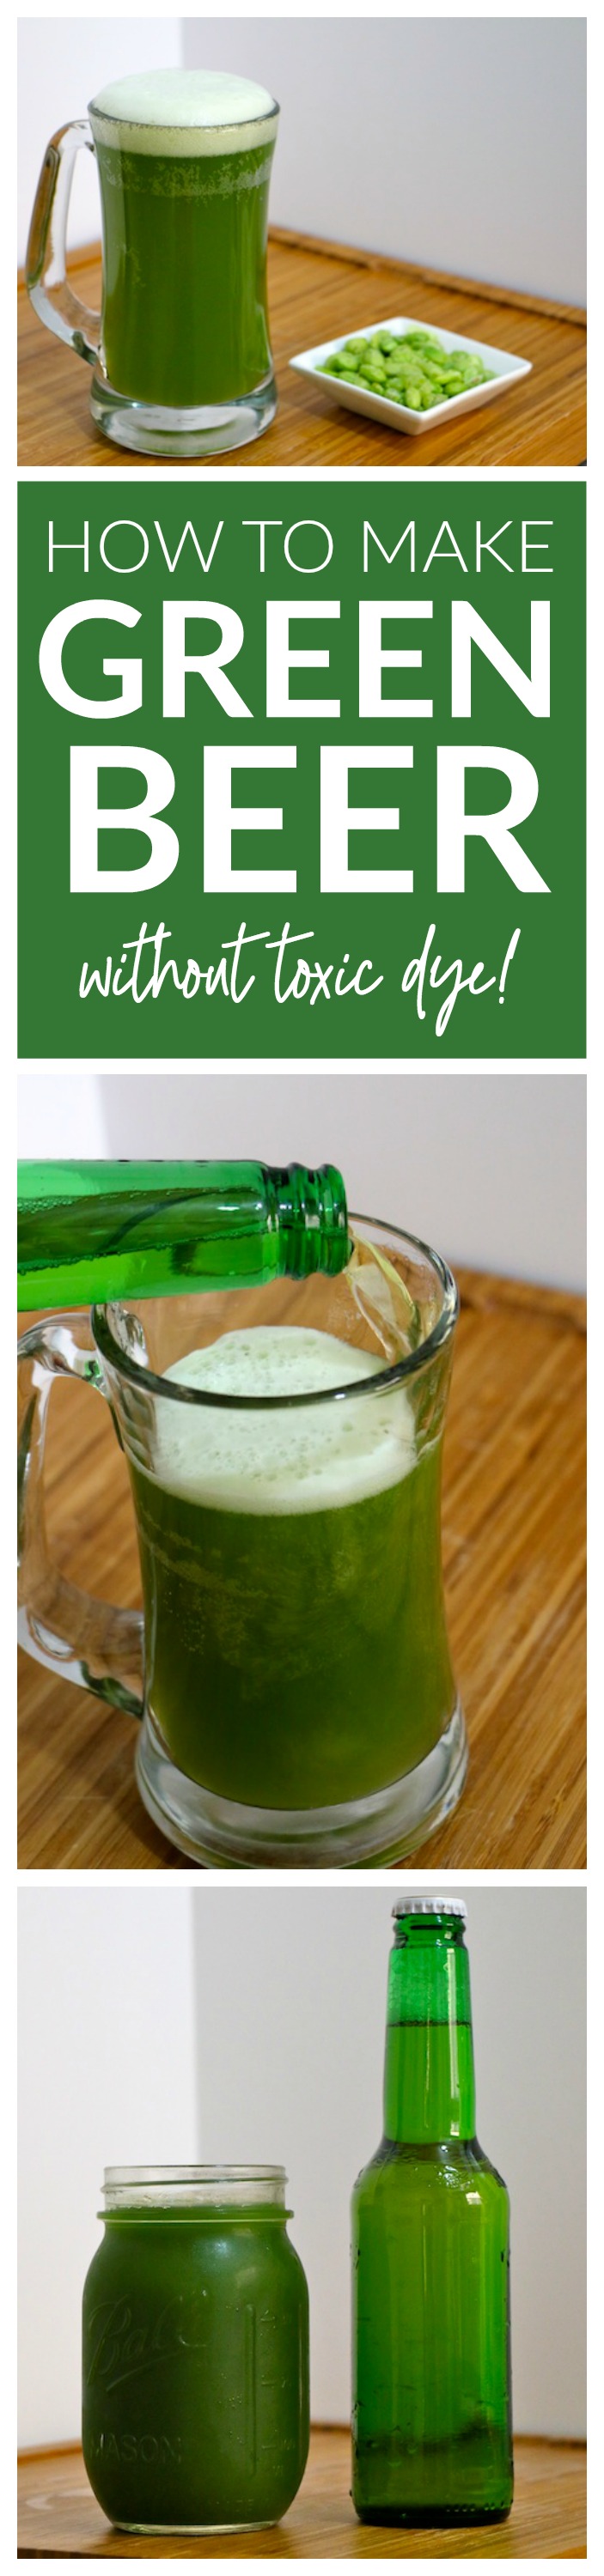 How To Make Green Beer Without Toxic Dye